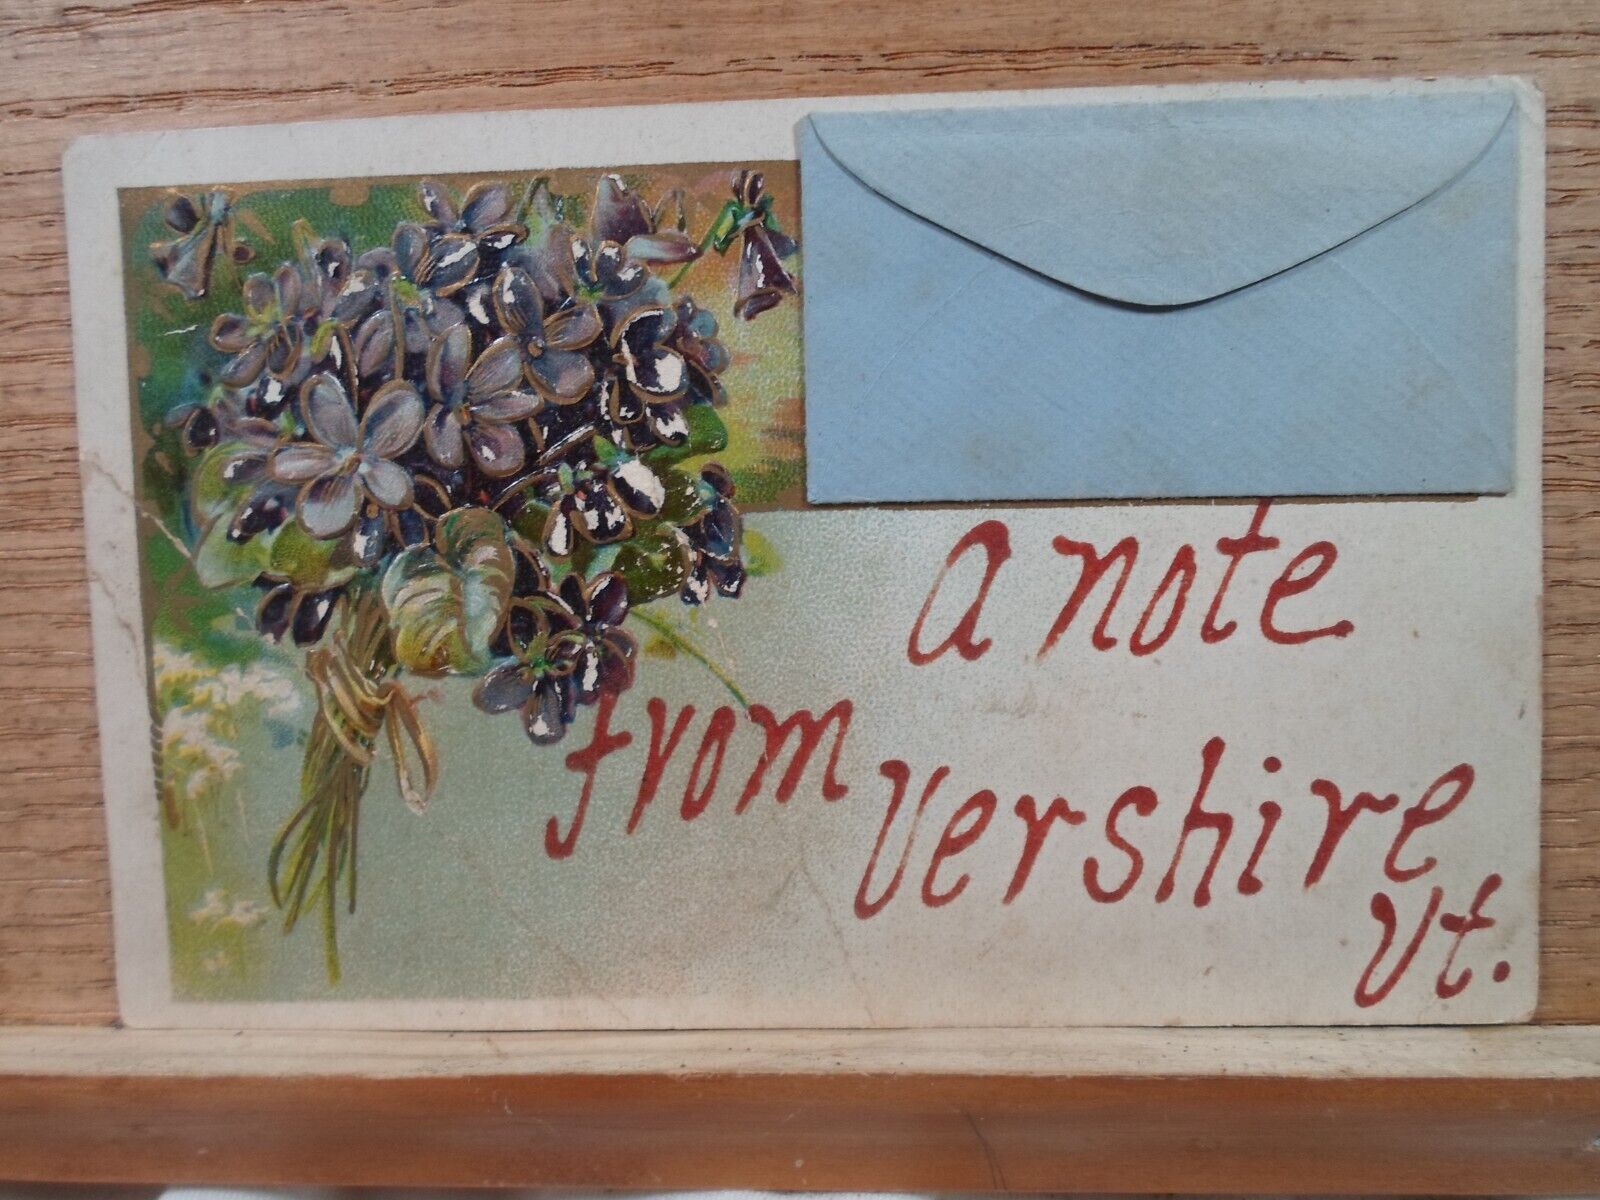 Vershire VT Vermont, A note from,  early postcard 